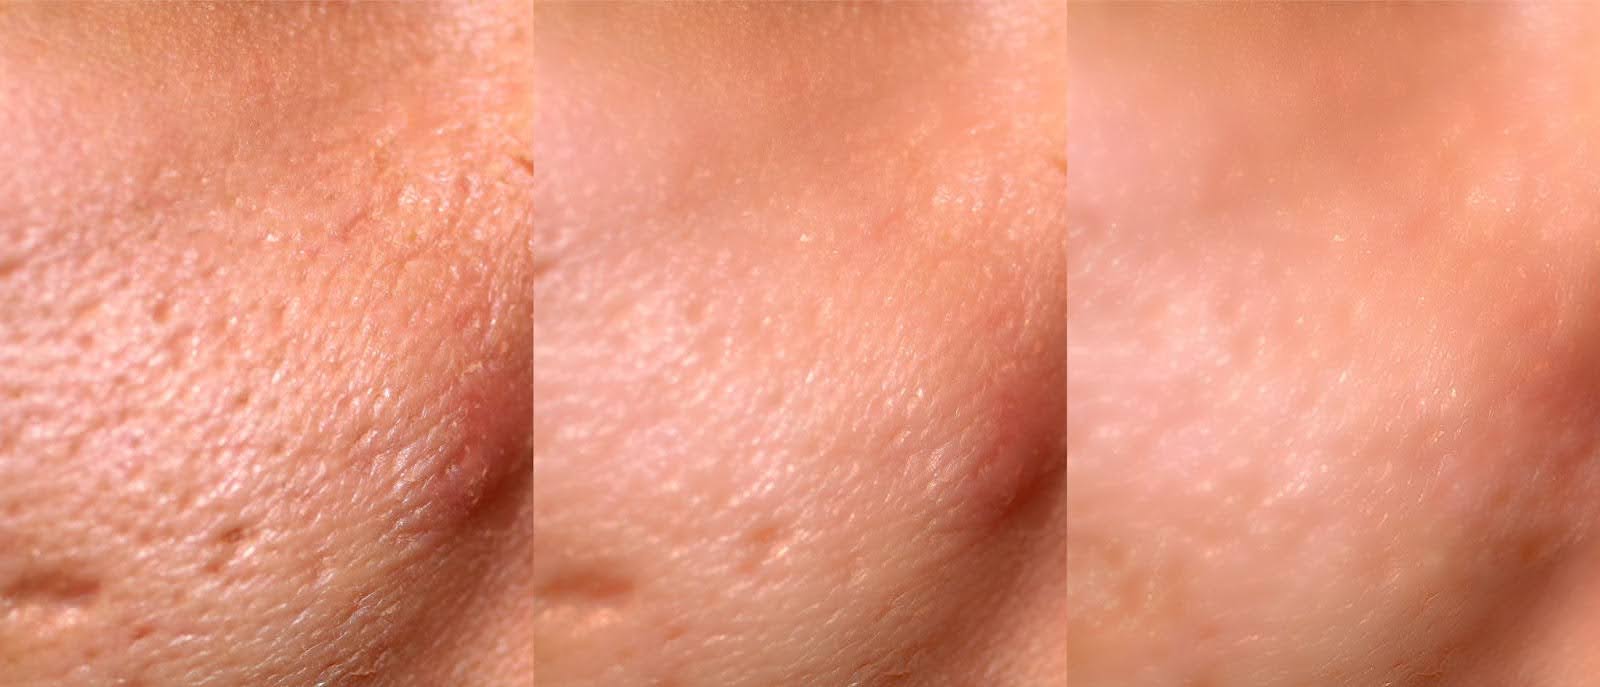 Types of Lasers Skin Treatments: Ablative vs Non-Ablative